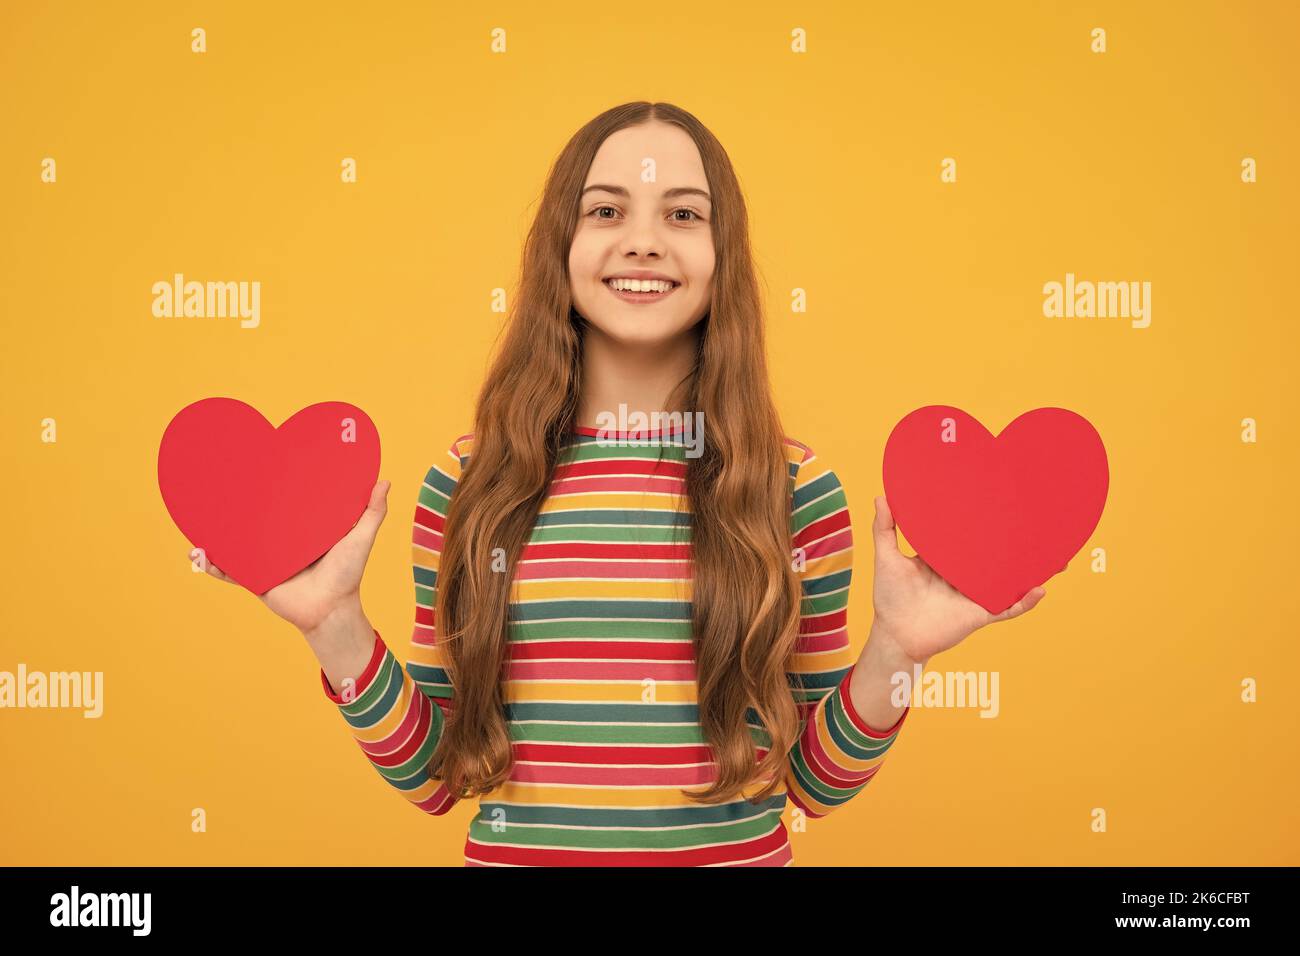 Teenage girl hold shape heart, heart-shape sign. Child holding a red heart love holiday valentine symbol. Stock Photo